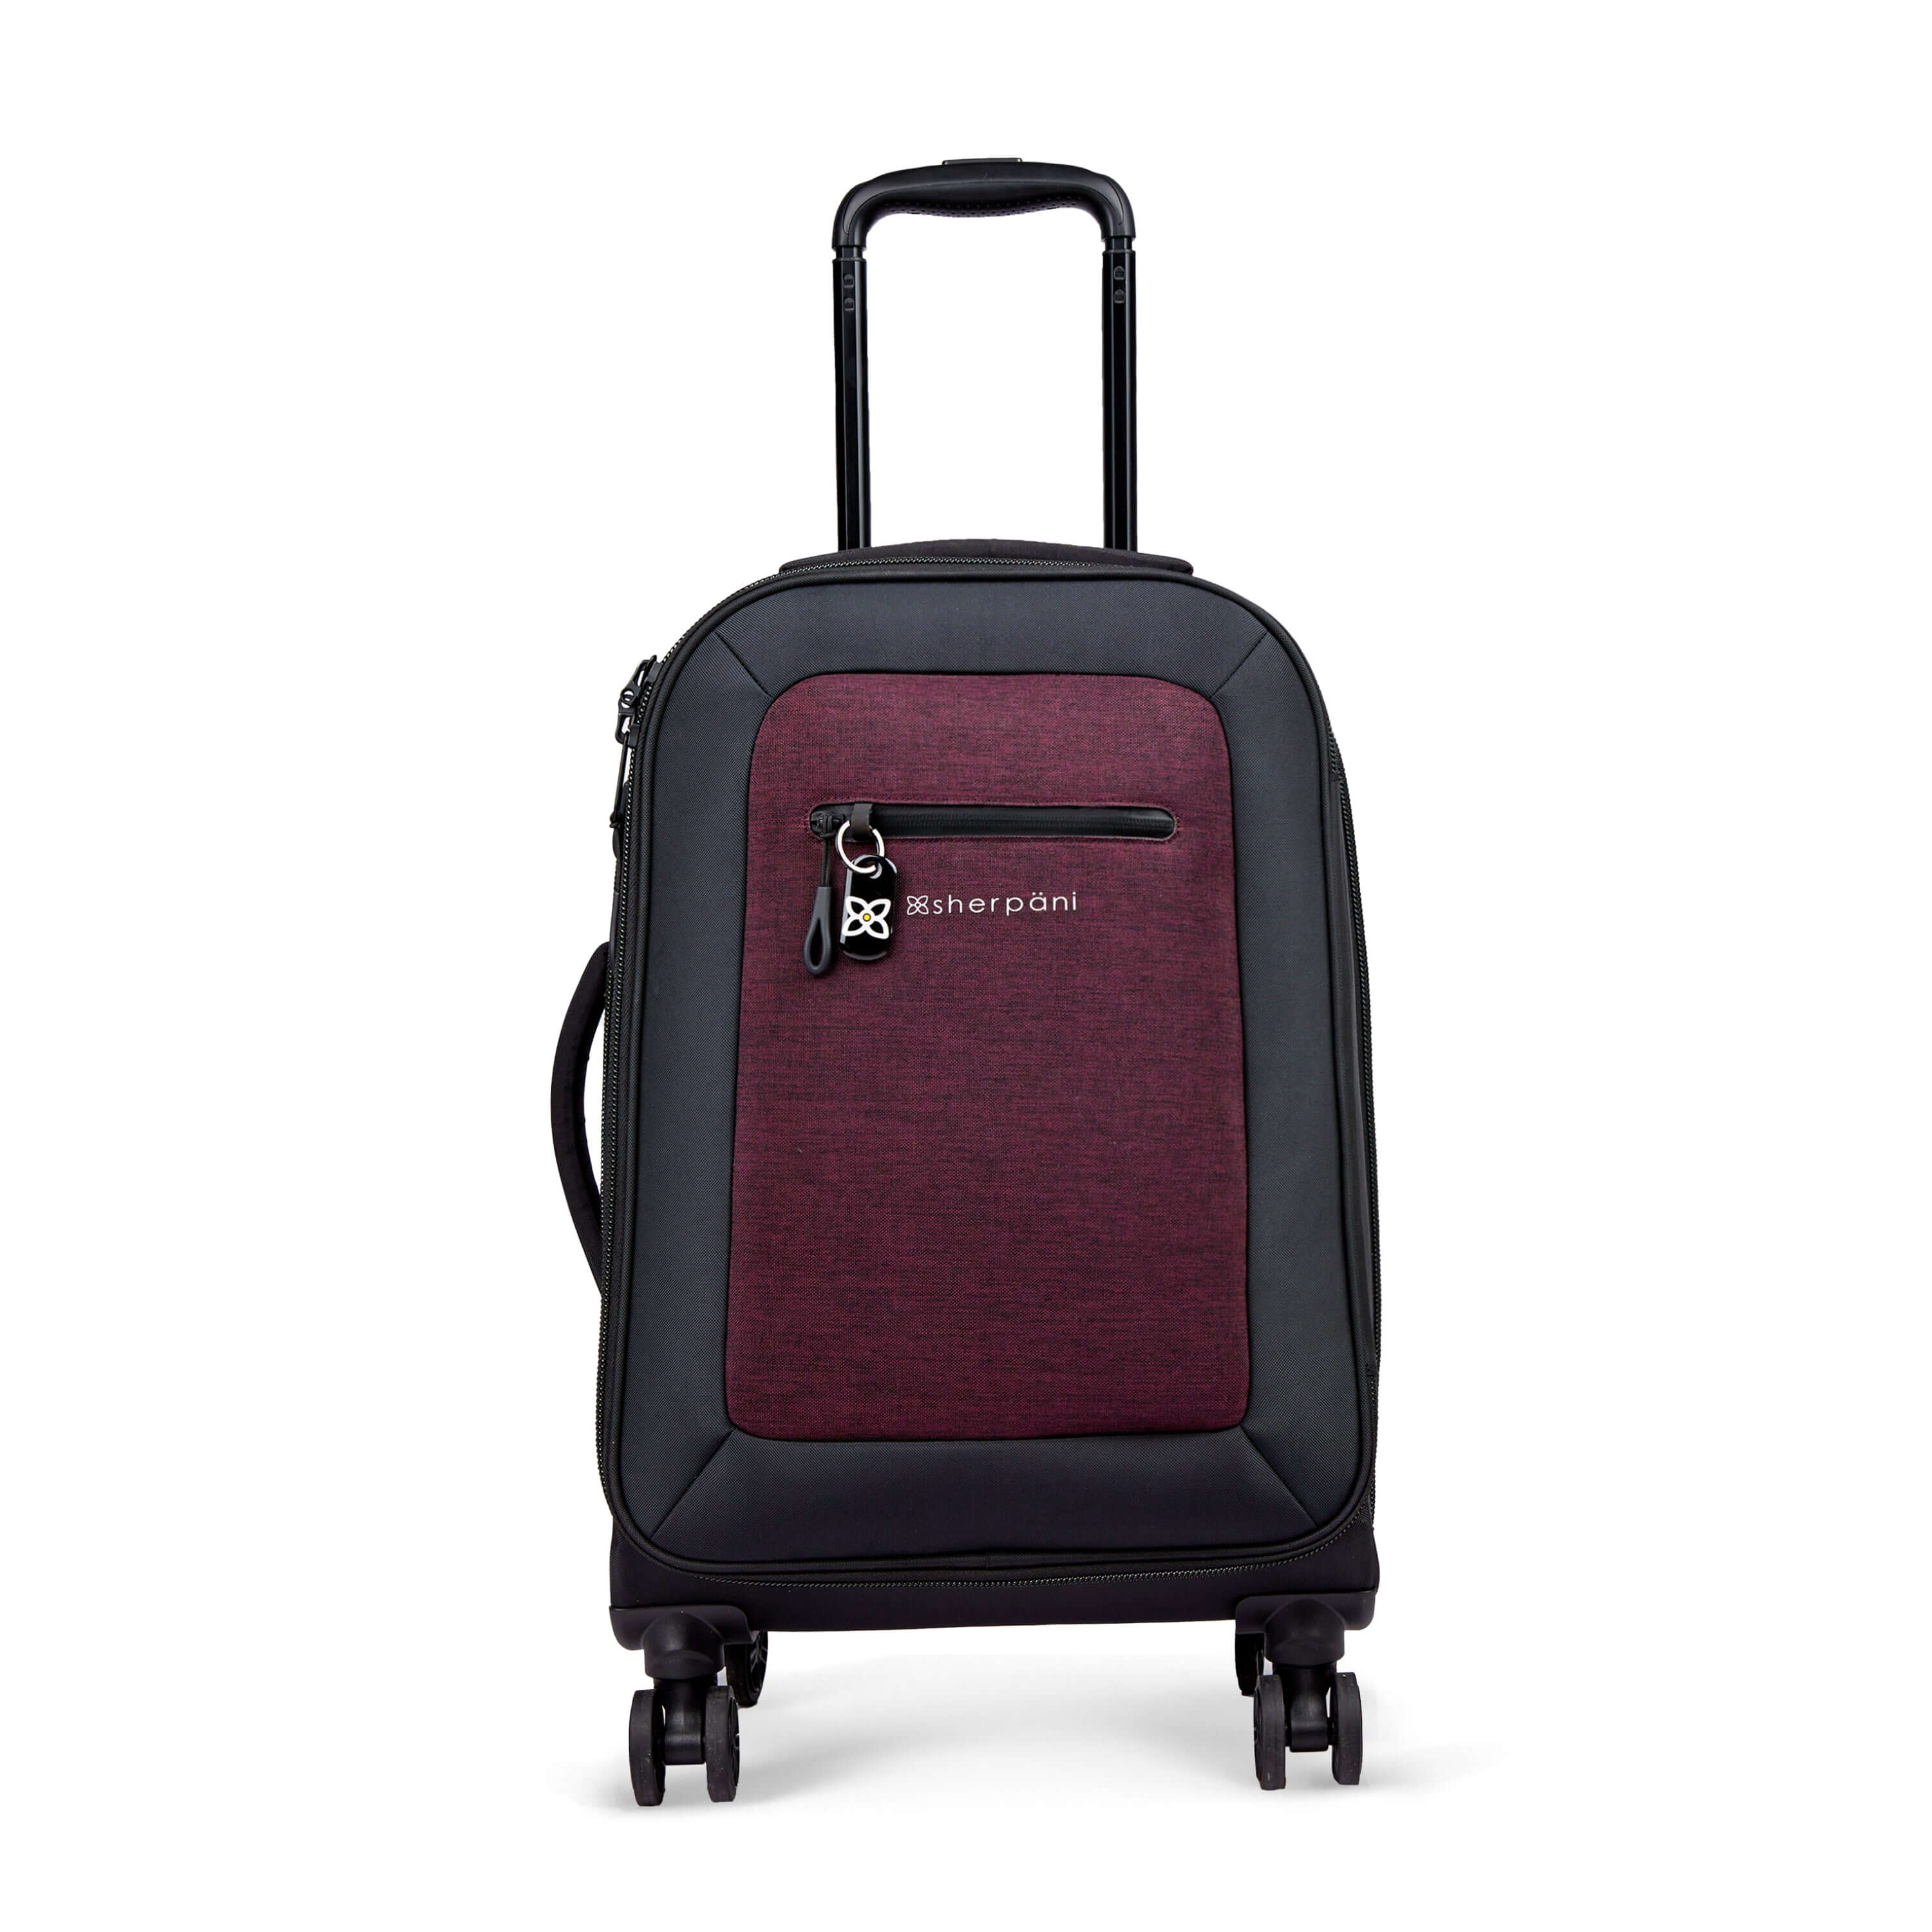 Flat front view of Sherpani’s Anti-Theft luggage the Latitude in Merlot. The suitcase has a soft shell exterior made from recycled plastic bottles and features vegan leather accents in black. There is a main zipper compartment, an expansion zipper and an external pocket on the front with a locking zipper and a ReturnMe tag. On the top of the suitcase sits a retractable luggage handle. On the side sits an easy-access handle. At the bottom are four 360-degree spinner wheels for smooth rolling.